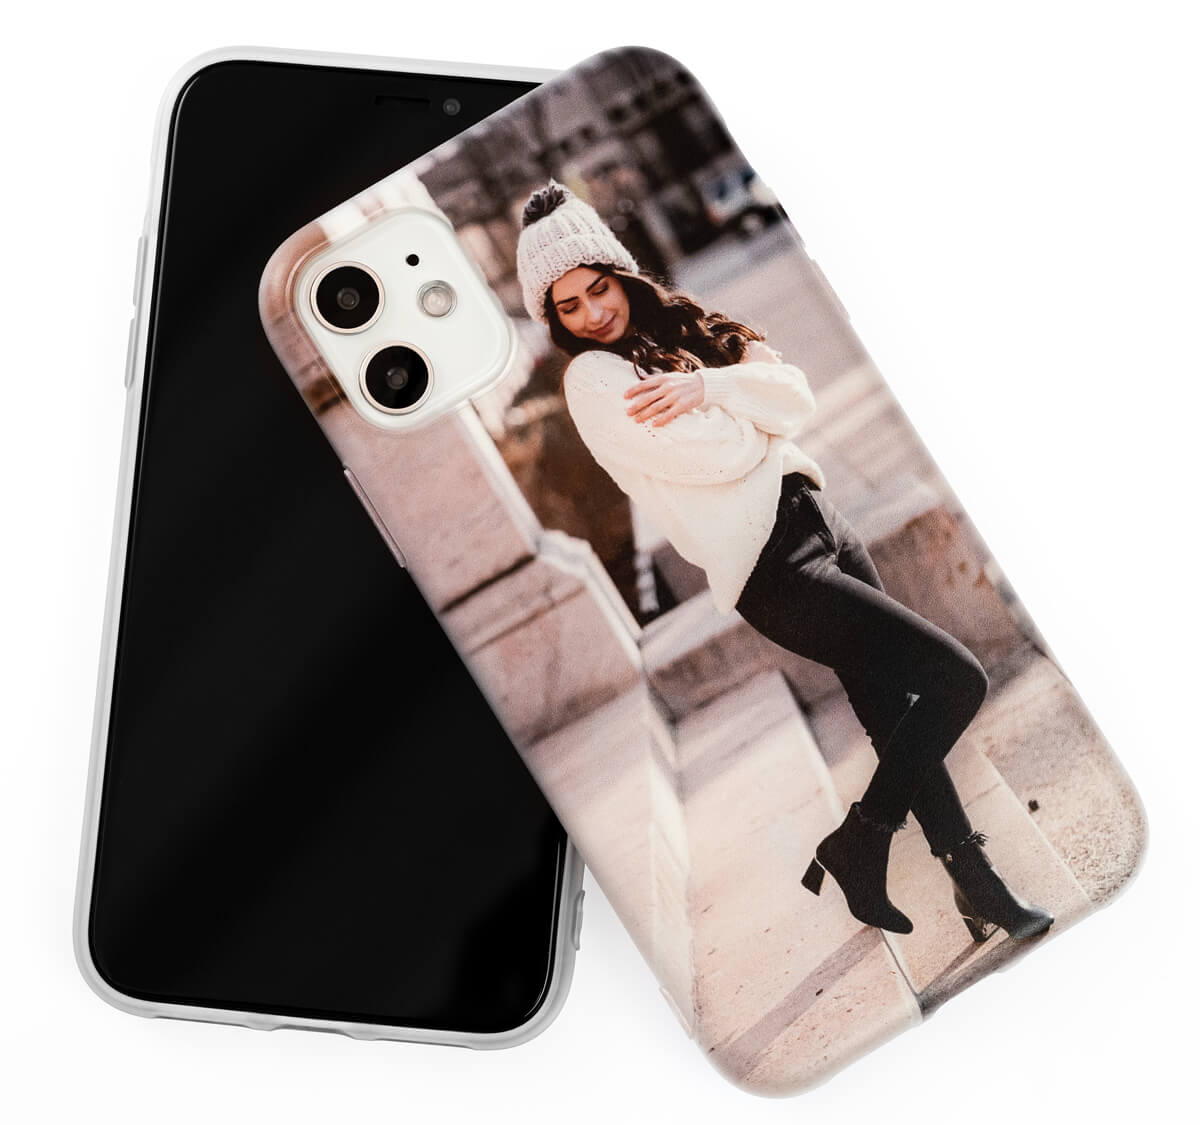  iPhone 12 cases in special TPU silicone